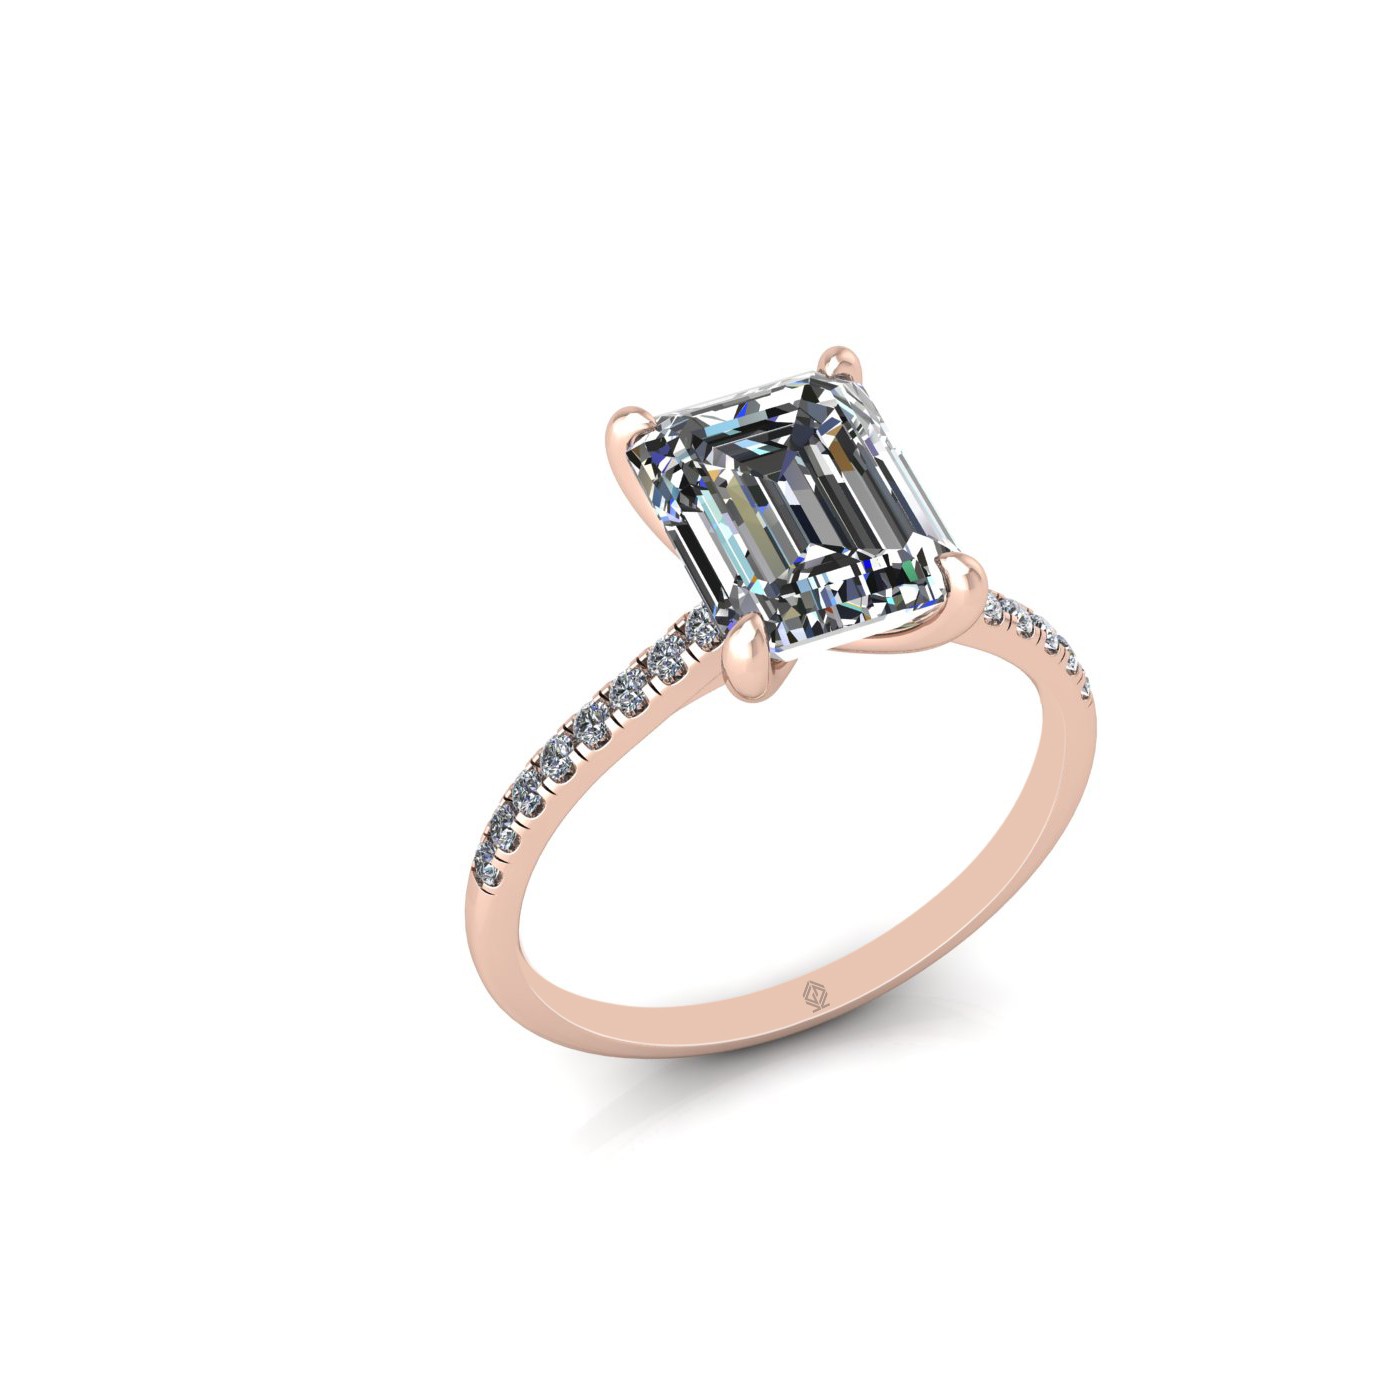 18k rose gold 2.5ct 4 prongs emerald cut diamond engagement ring with whisper thin pavÉ set band Photos & images